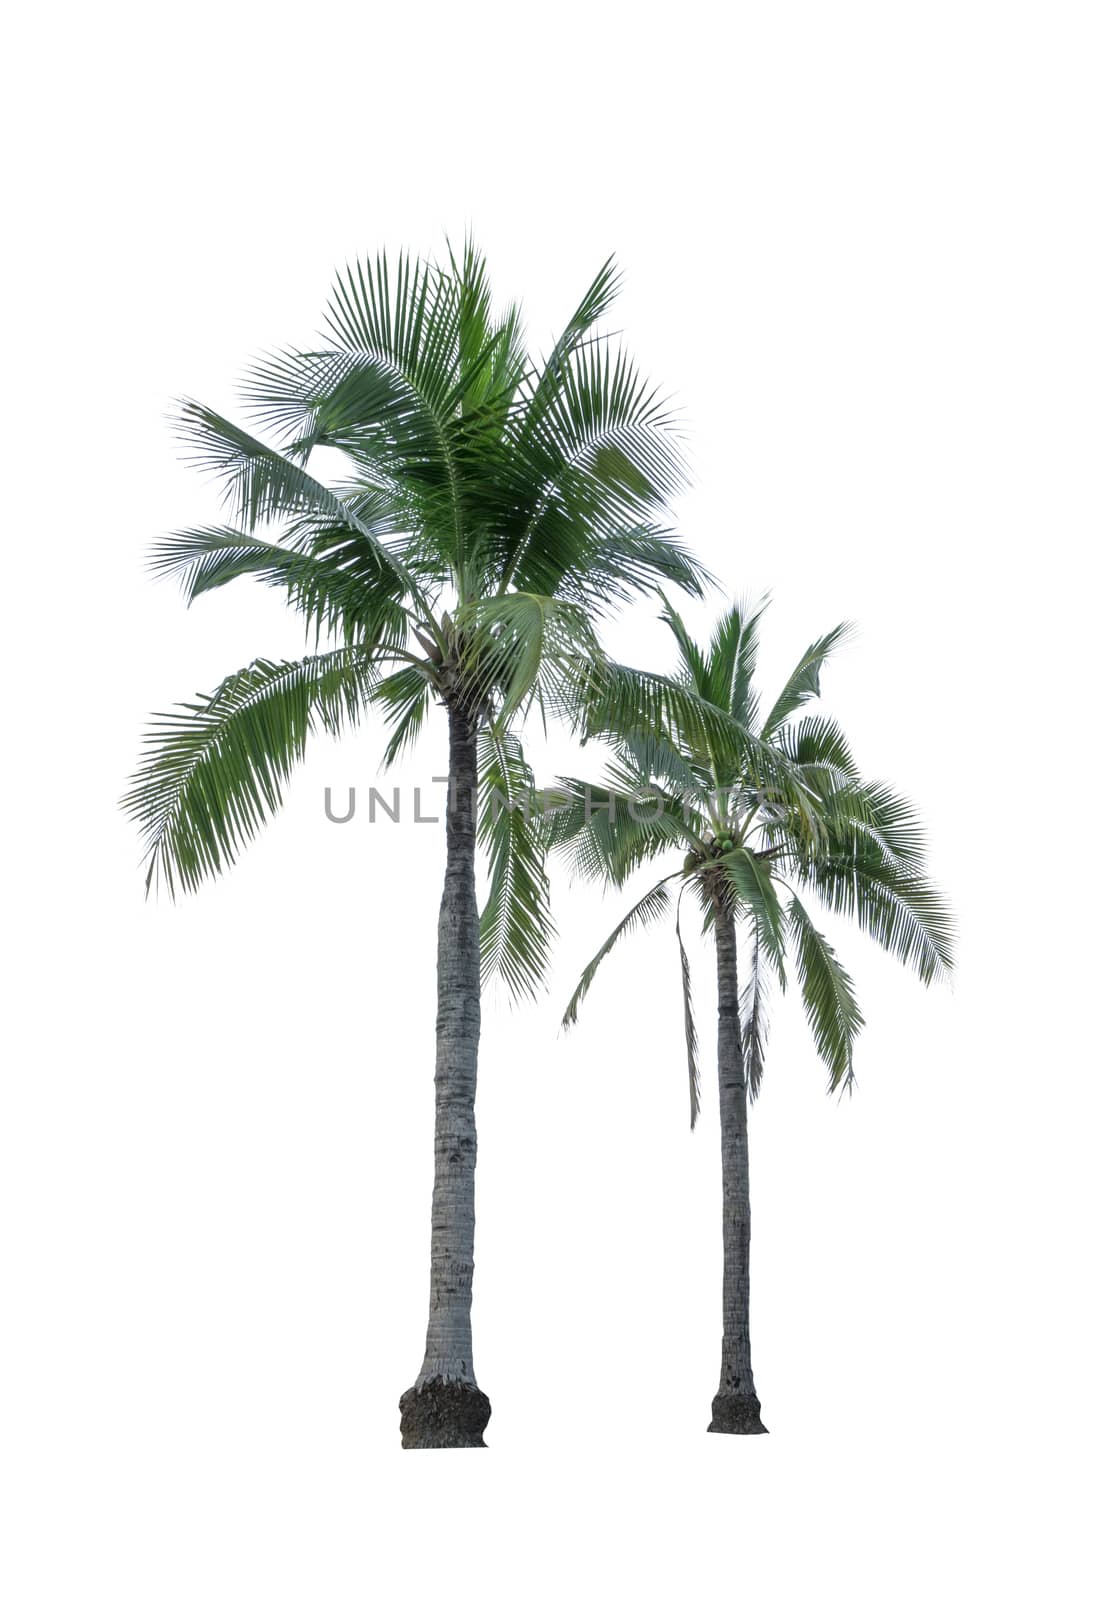 Two coconut tree isolated on white background used for advertising decorative architecture. Summer and beach concept by Fahroni